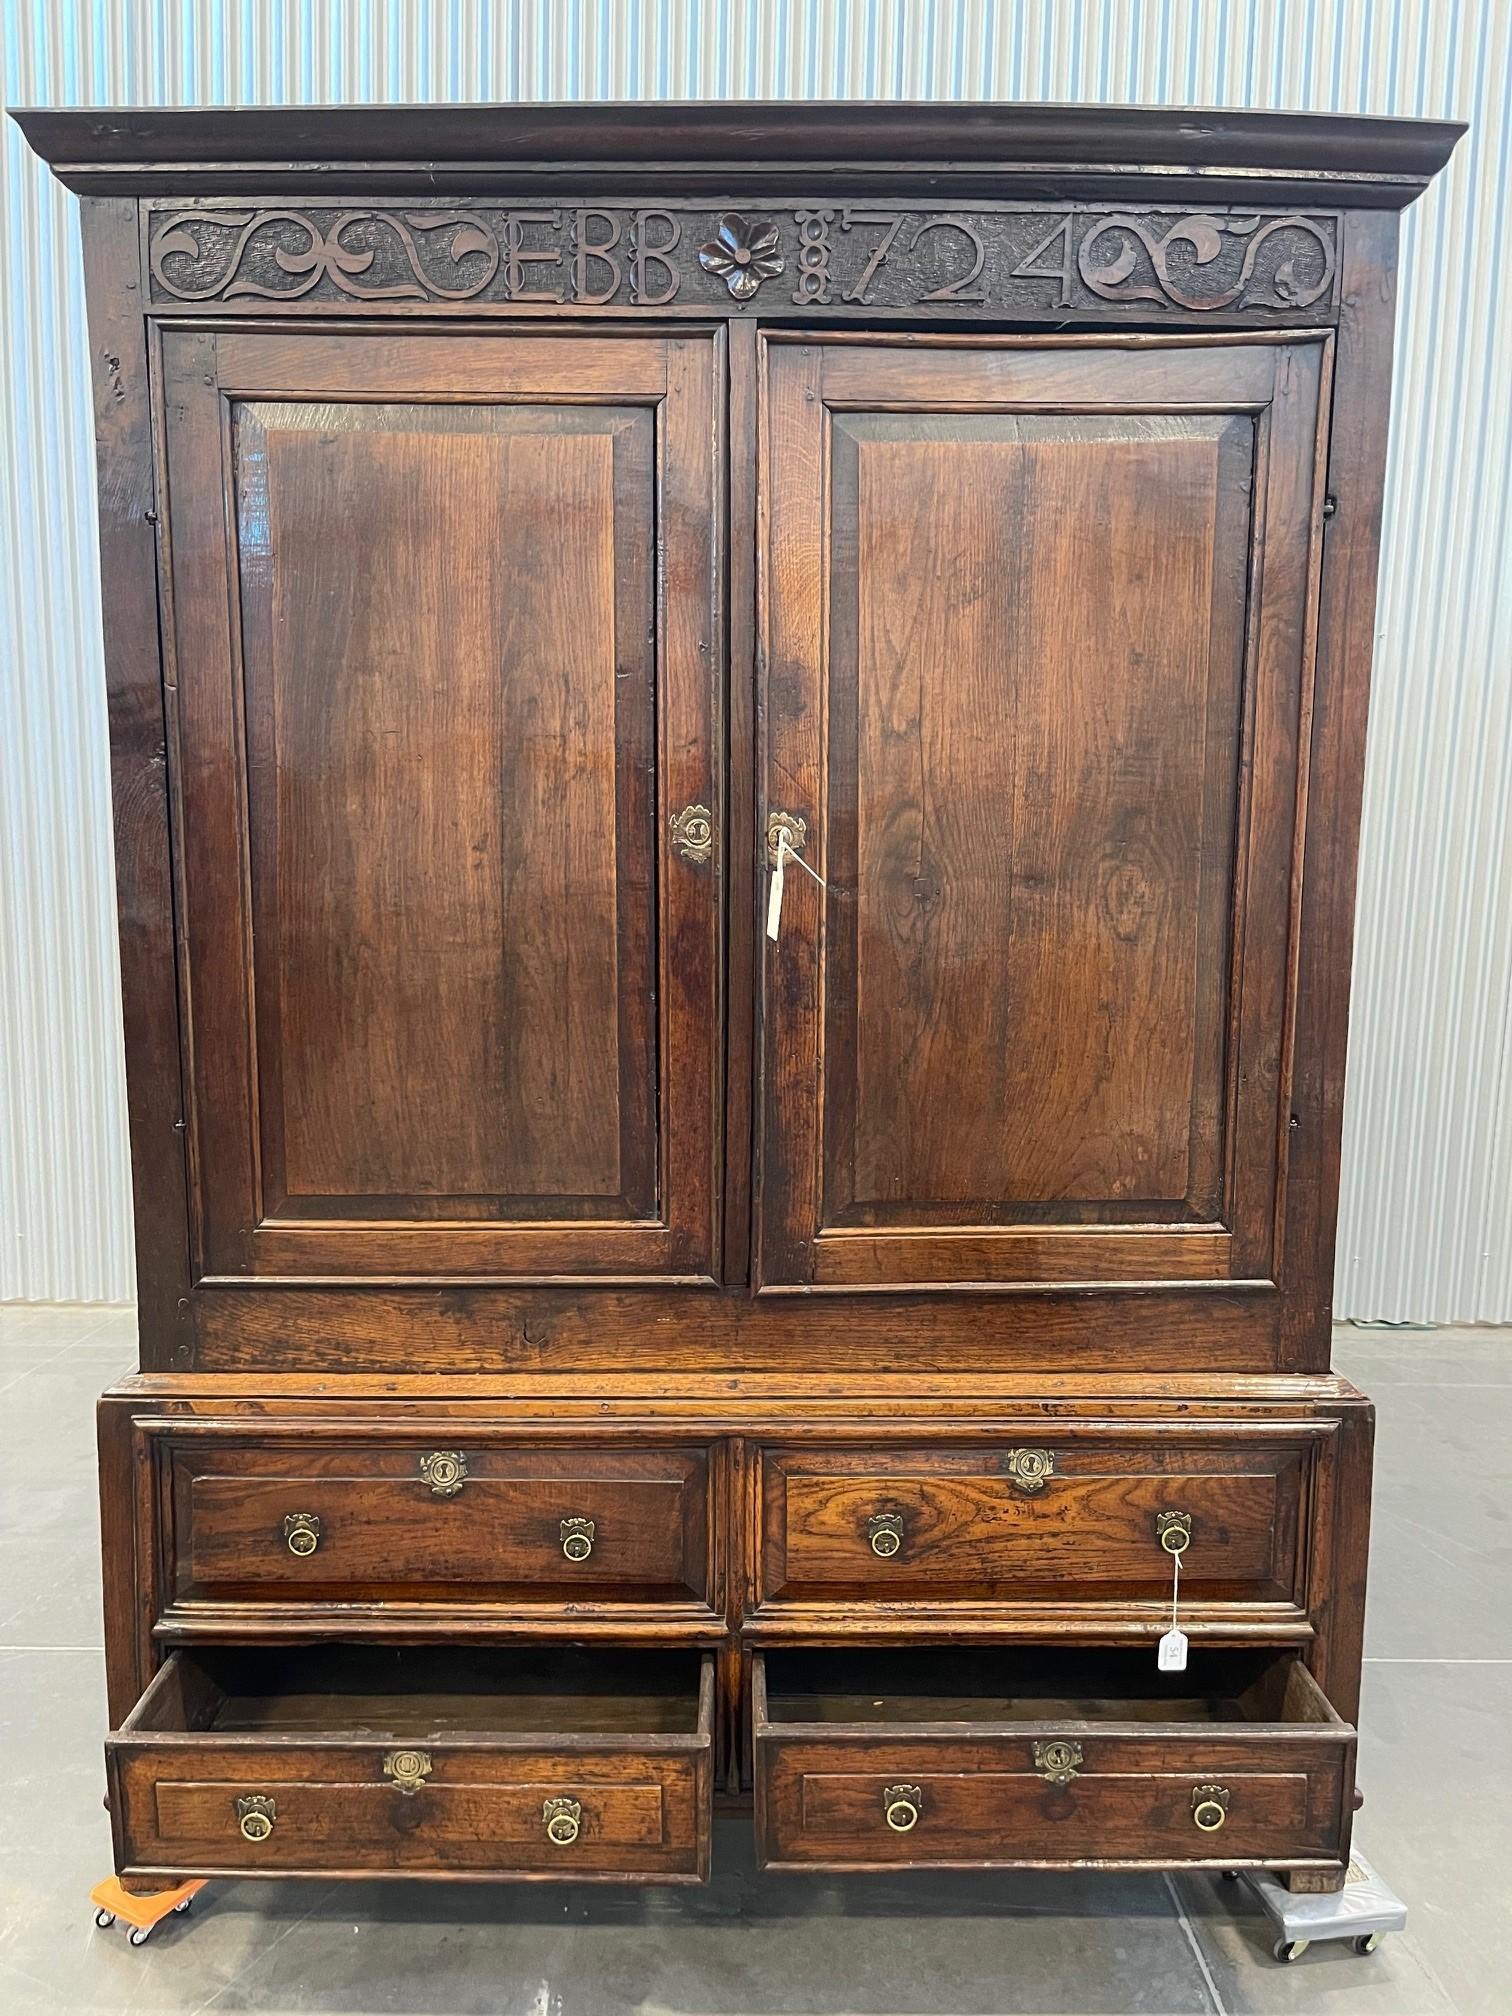 AN EARLY OAK CLOTHES PRESS, BEARING THE DATE 1724
Carved into the frieze ‘EBB 1724’. 
Condition Report: This appears to have had some adaptions over the years, there is a hanging rail fitted to the interior, shelves have probably been removed to